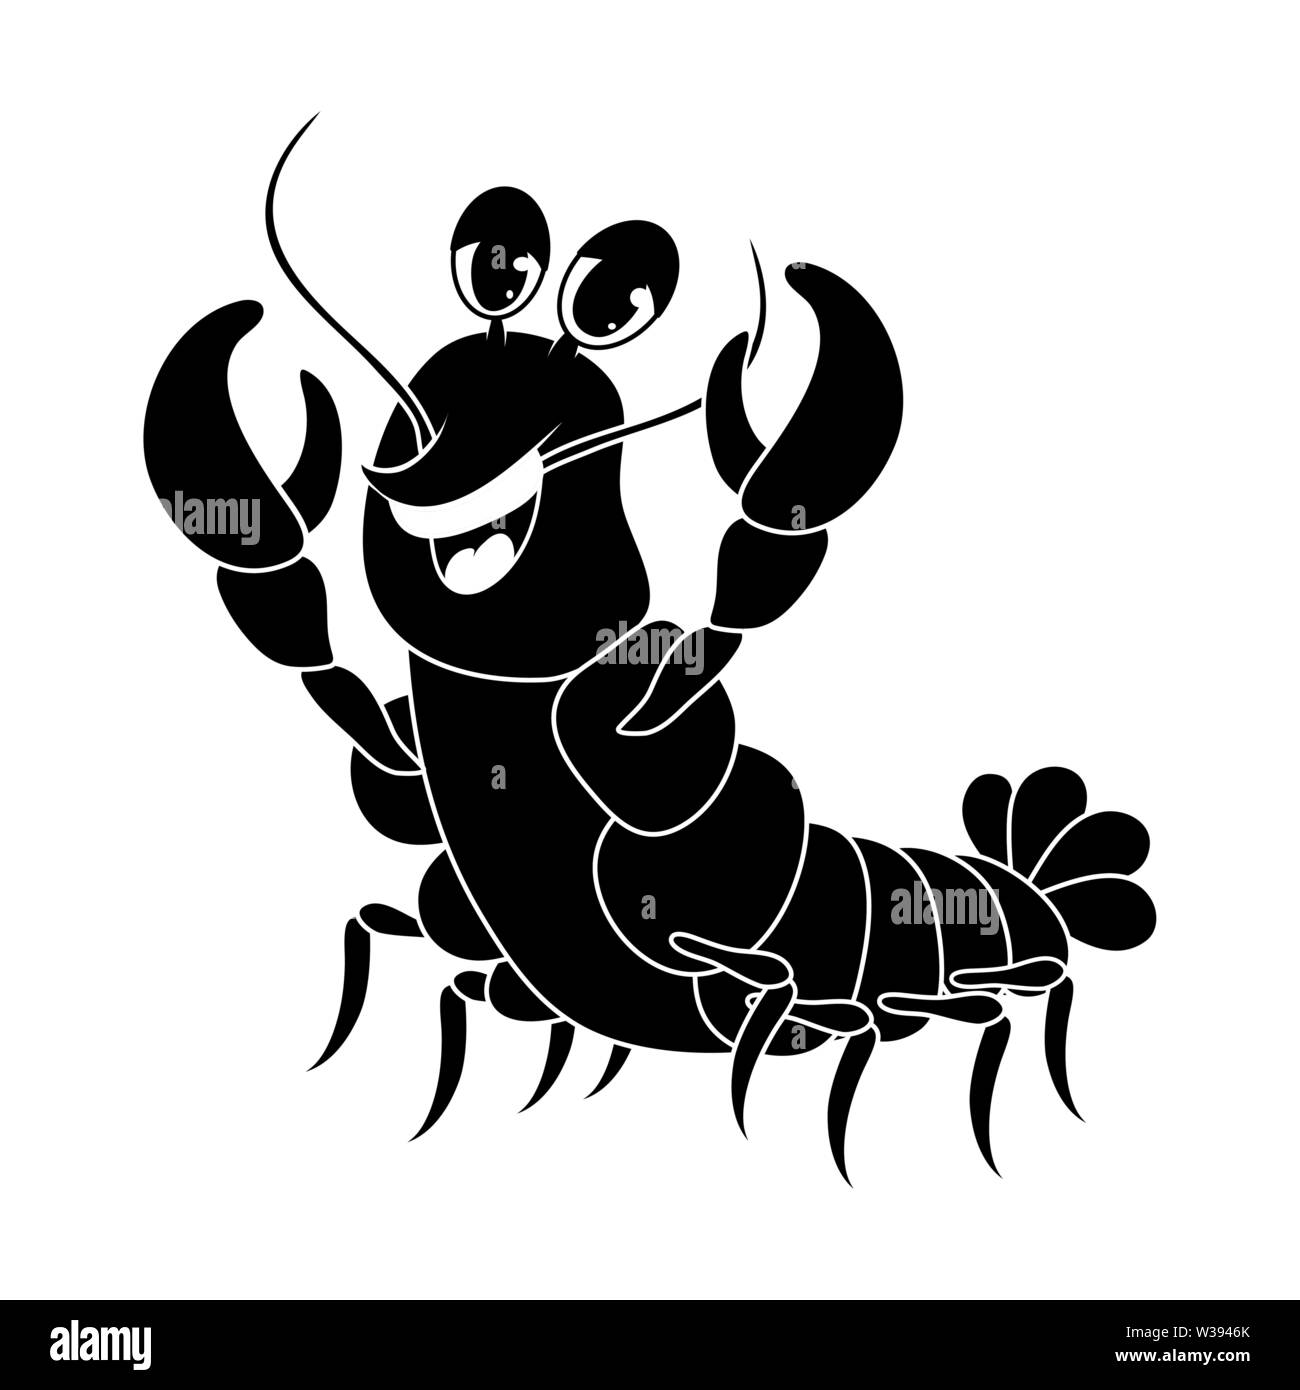 crawfish silhouette cartoon cute character illustration isolated on white background Stock Vector